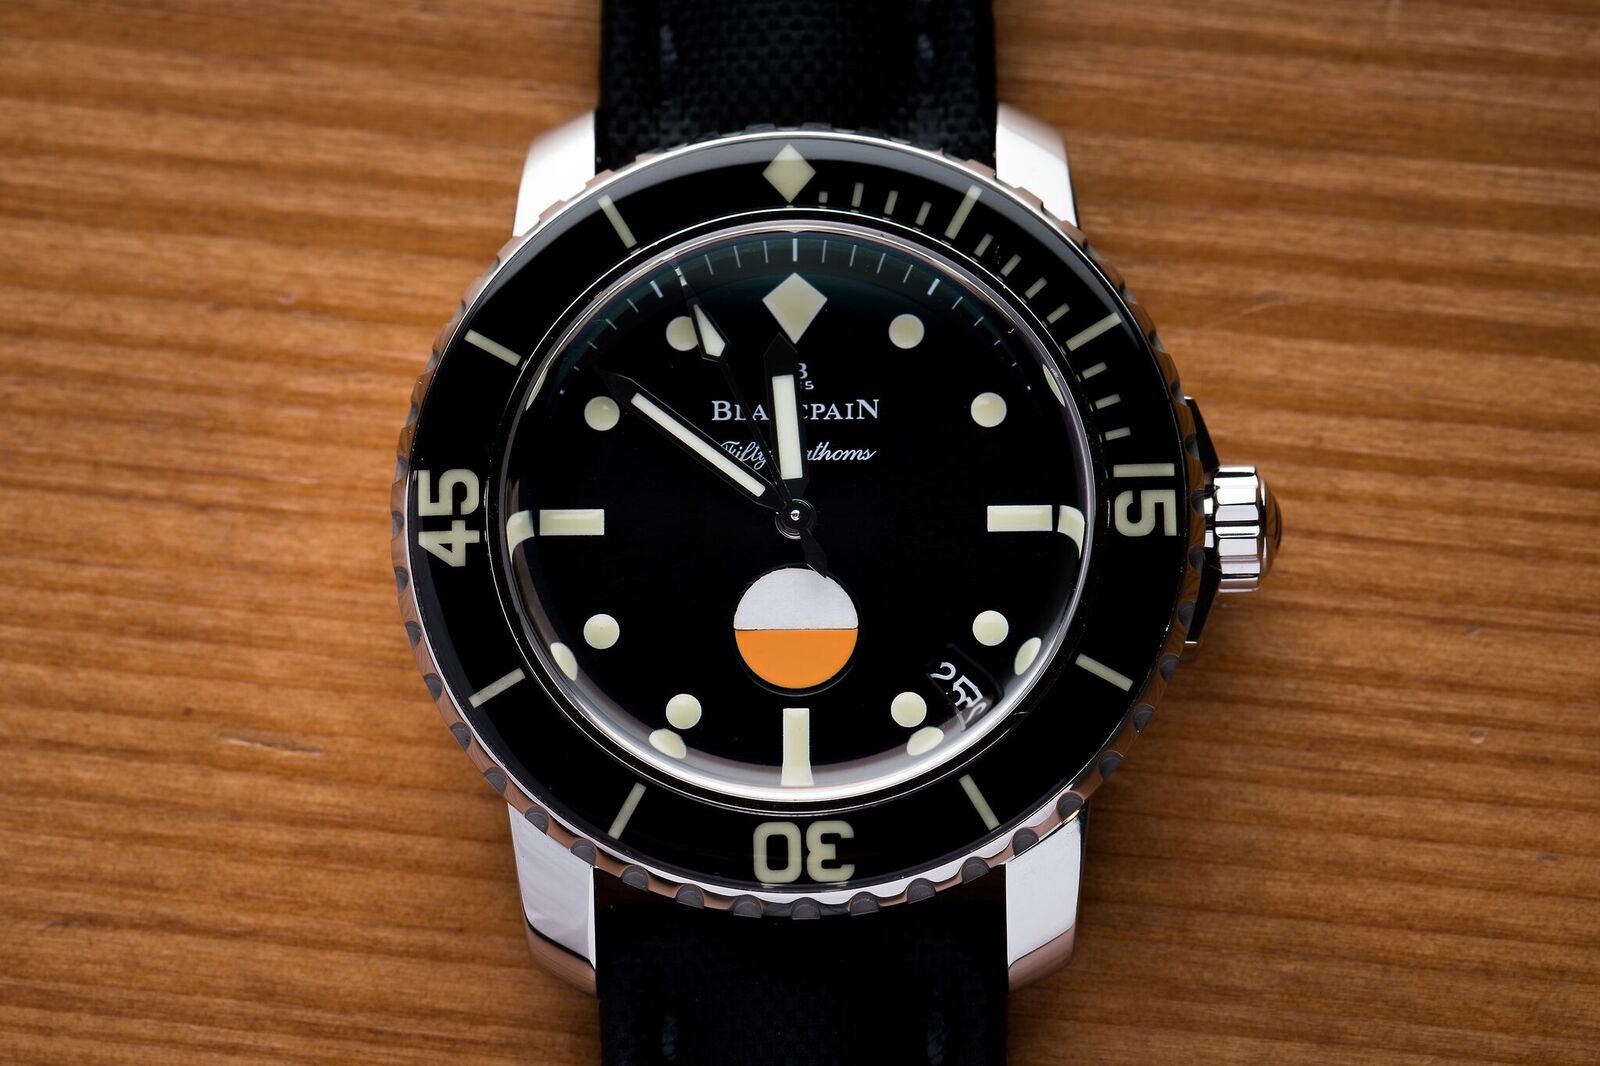 Watch of the week: Blancpain “Tribute to Fifty Fathoms MIL-SPEC”